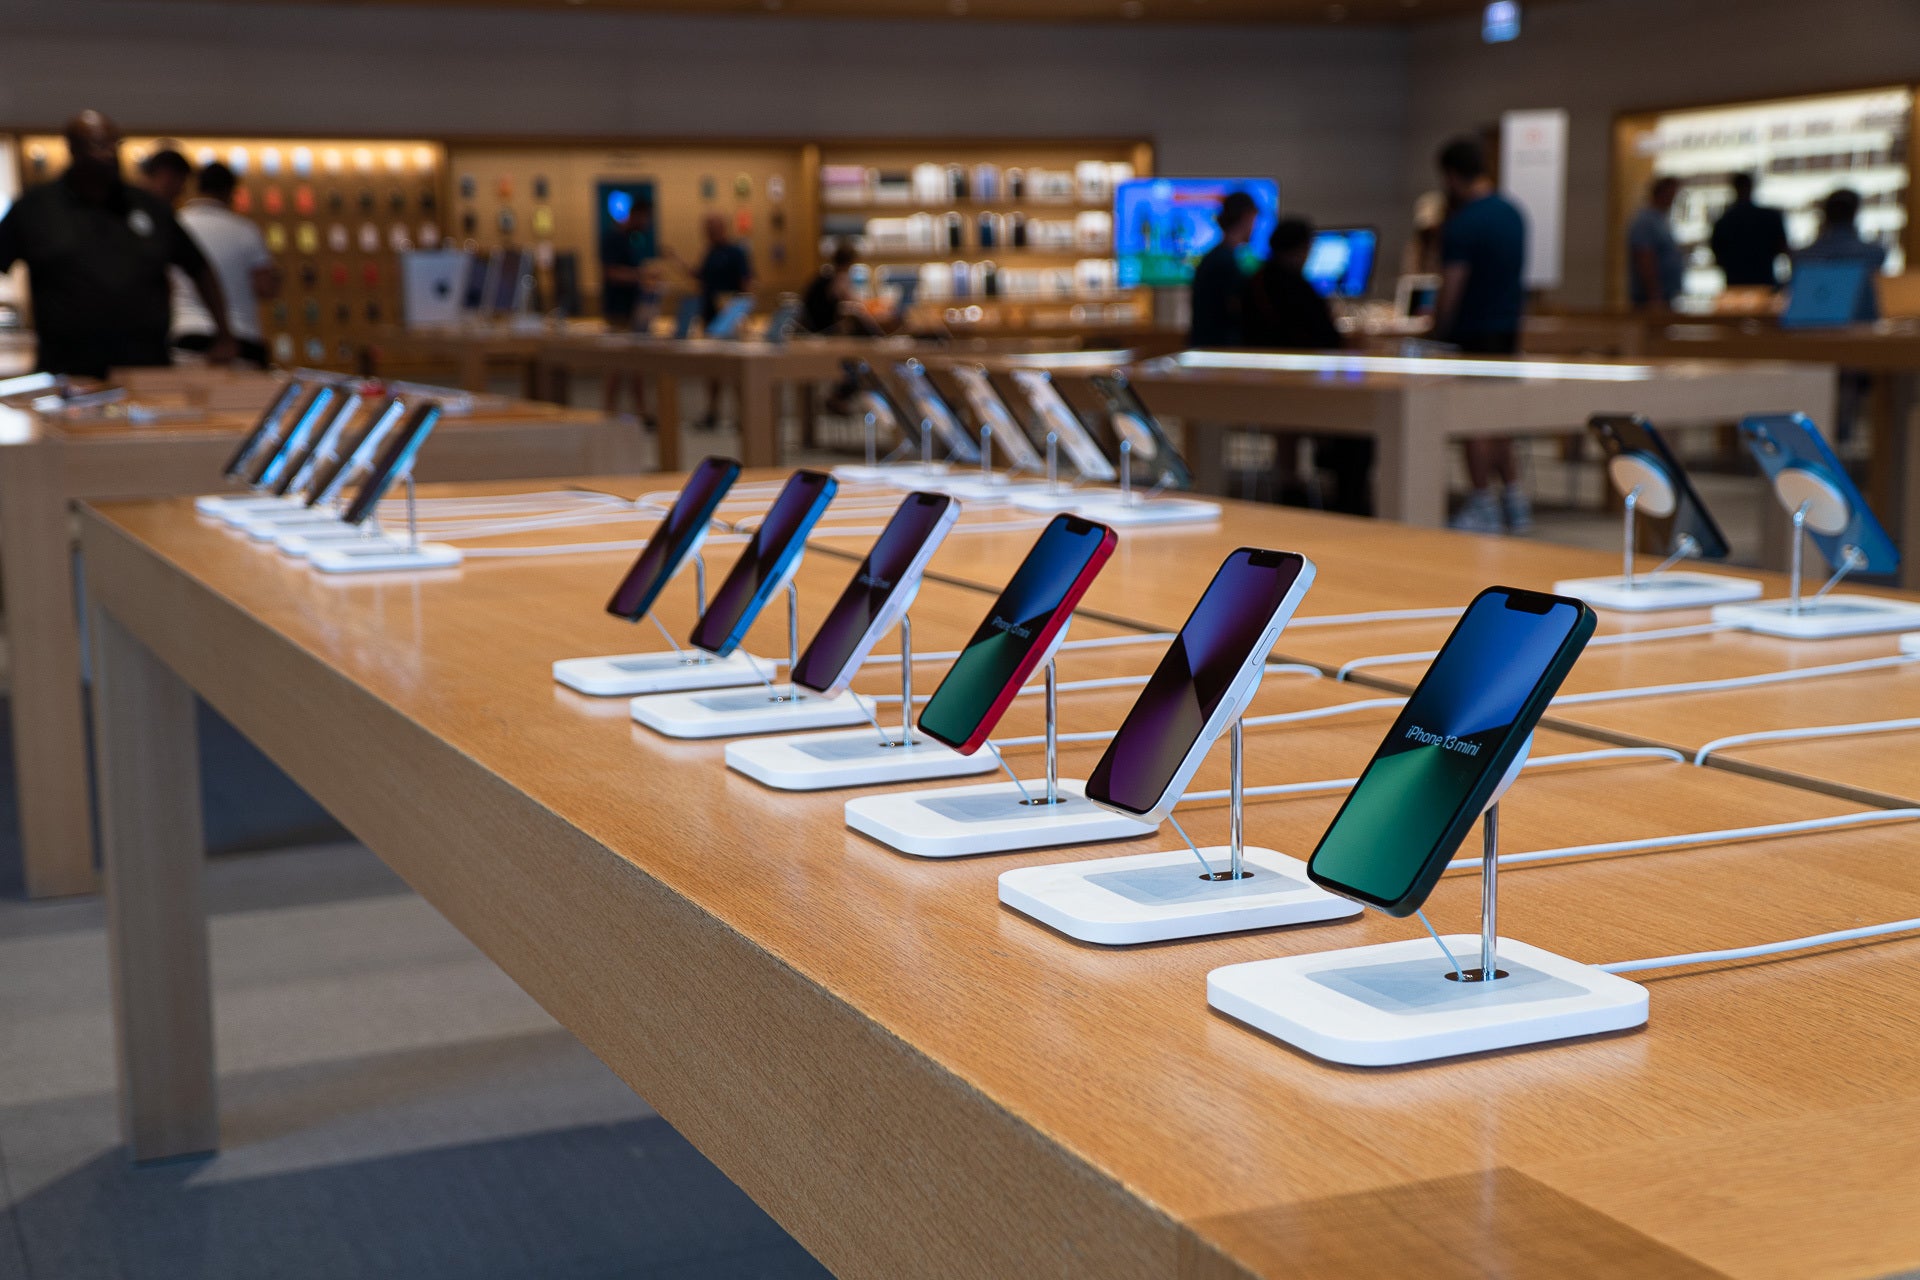 Inside one of Apple's physical stores where you can get hands-on experience with all the available iPhone models (Image Credit–PhoneArena) - T-Mobile reps say "no phone"? Well, high five them and buy it elsewhere